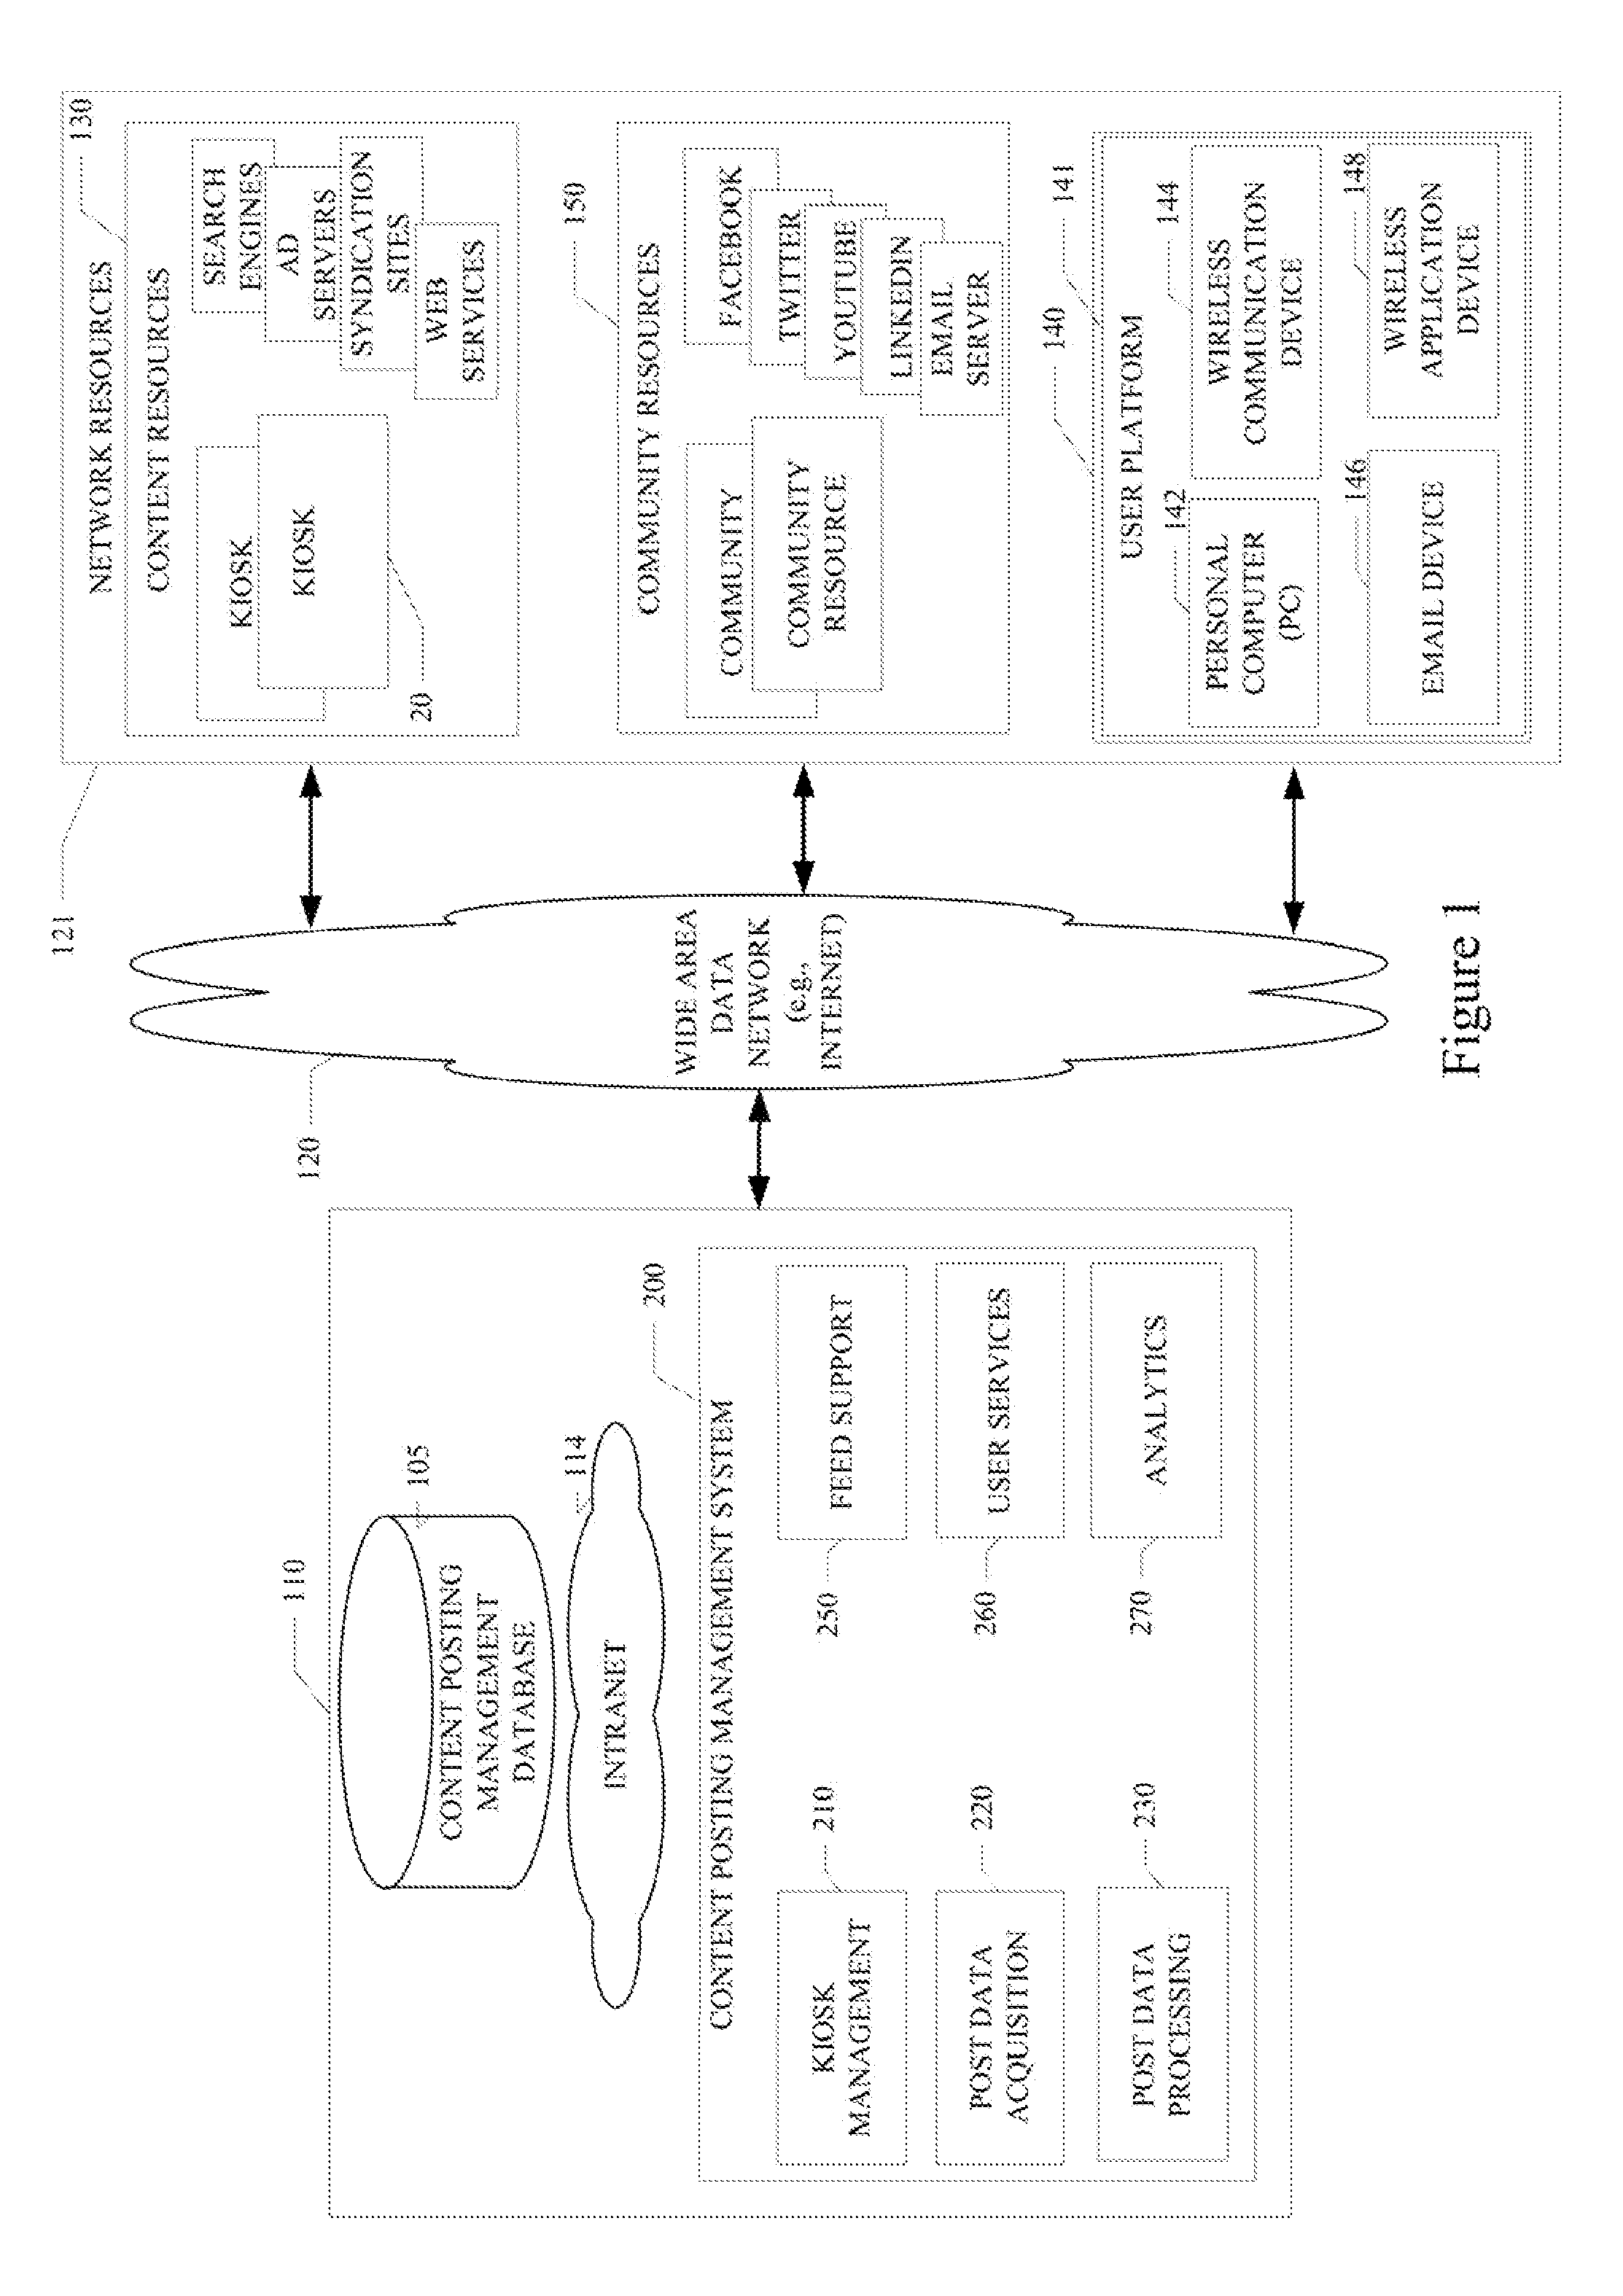 System and method for posting content to network sites